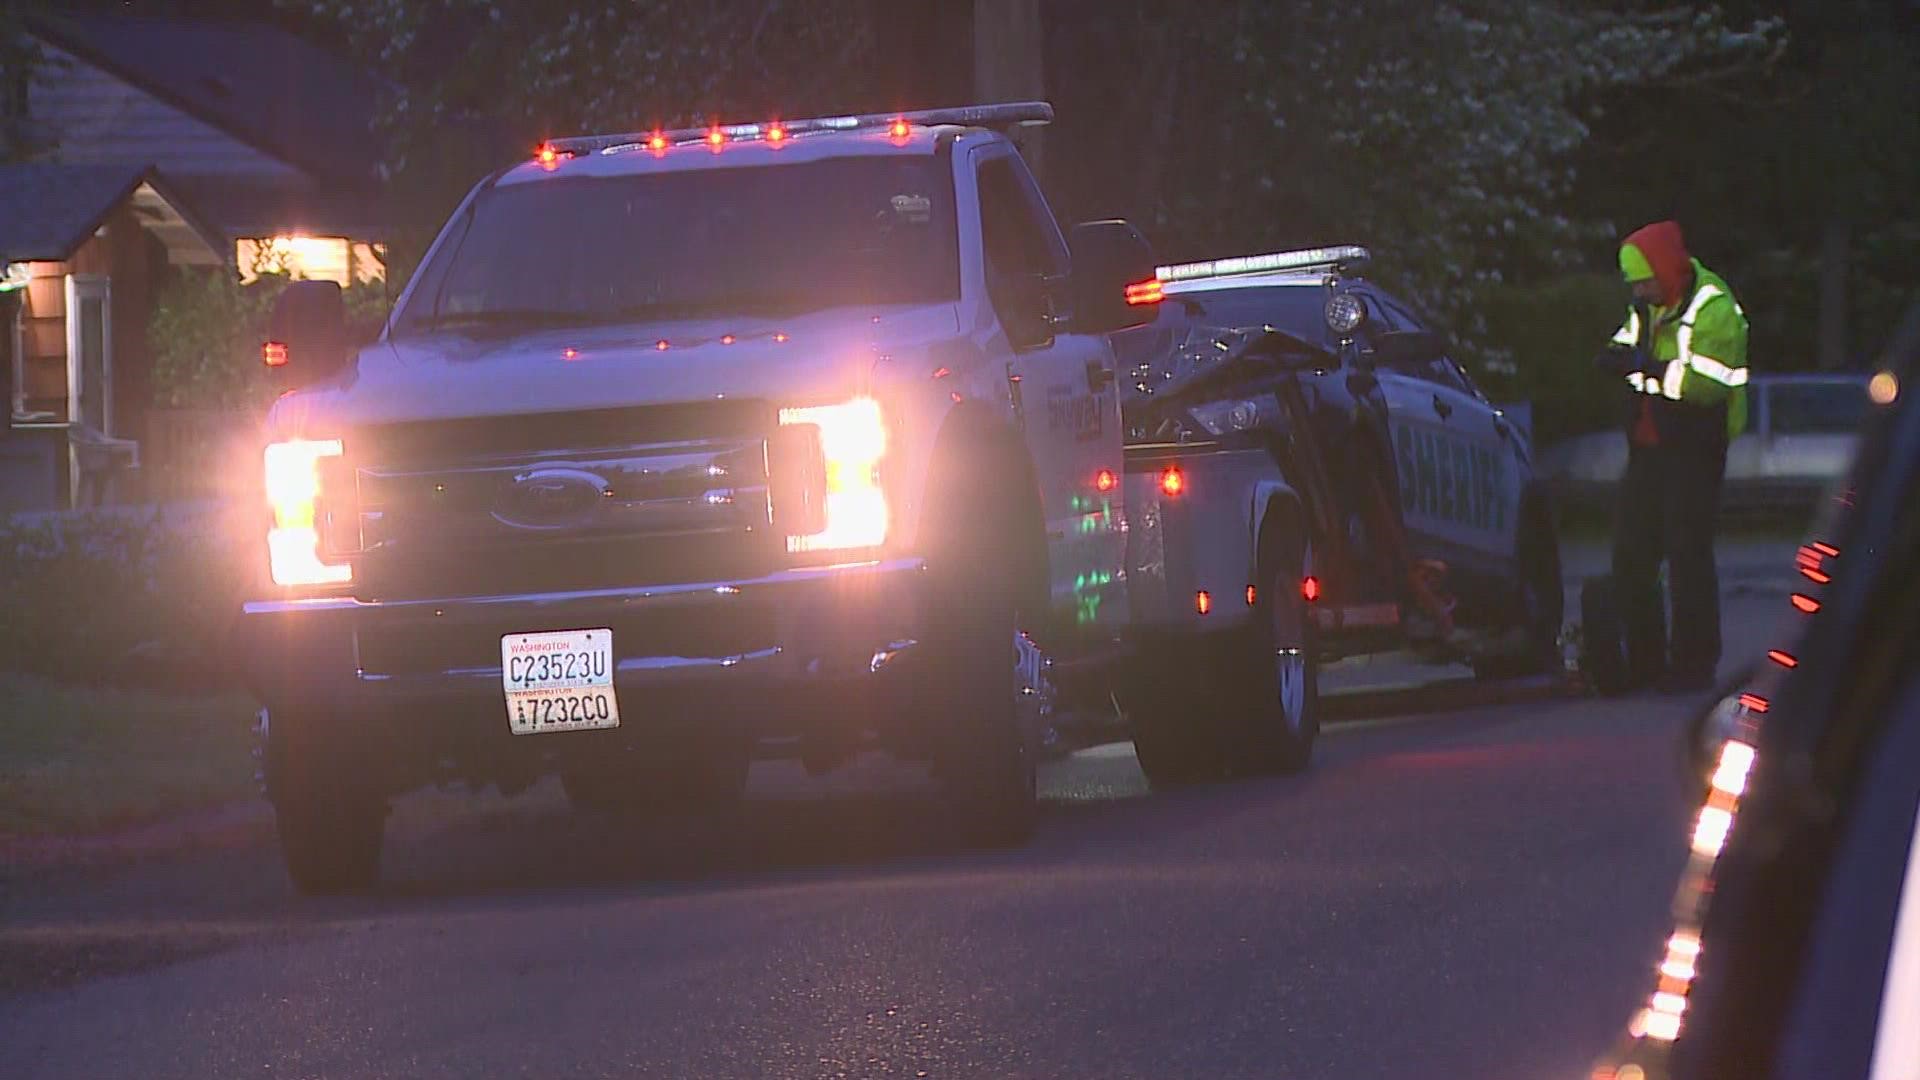 A deputy attempted a traffic stop at S. 116th St. and 1st Ave S. in Burien when the suspect backed up and rammed the troopers vehicle before taking off